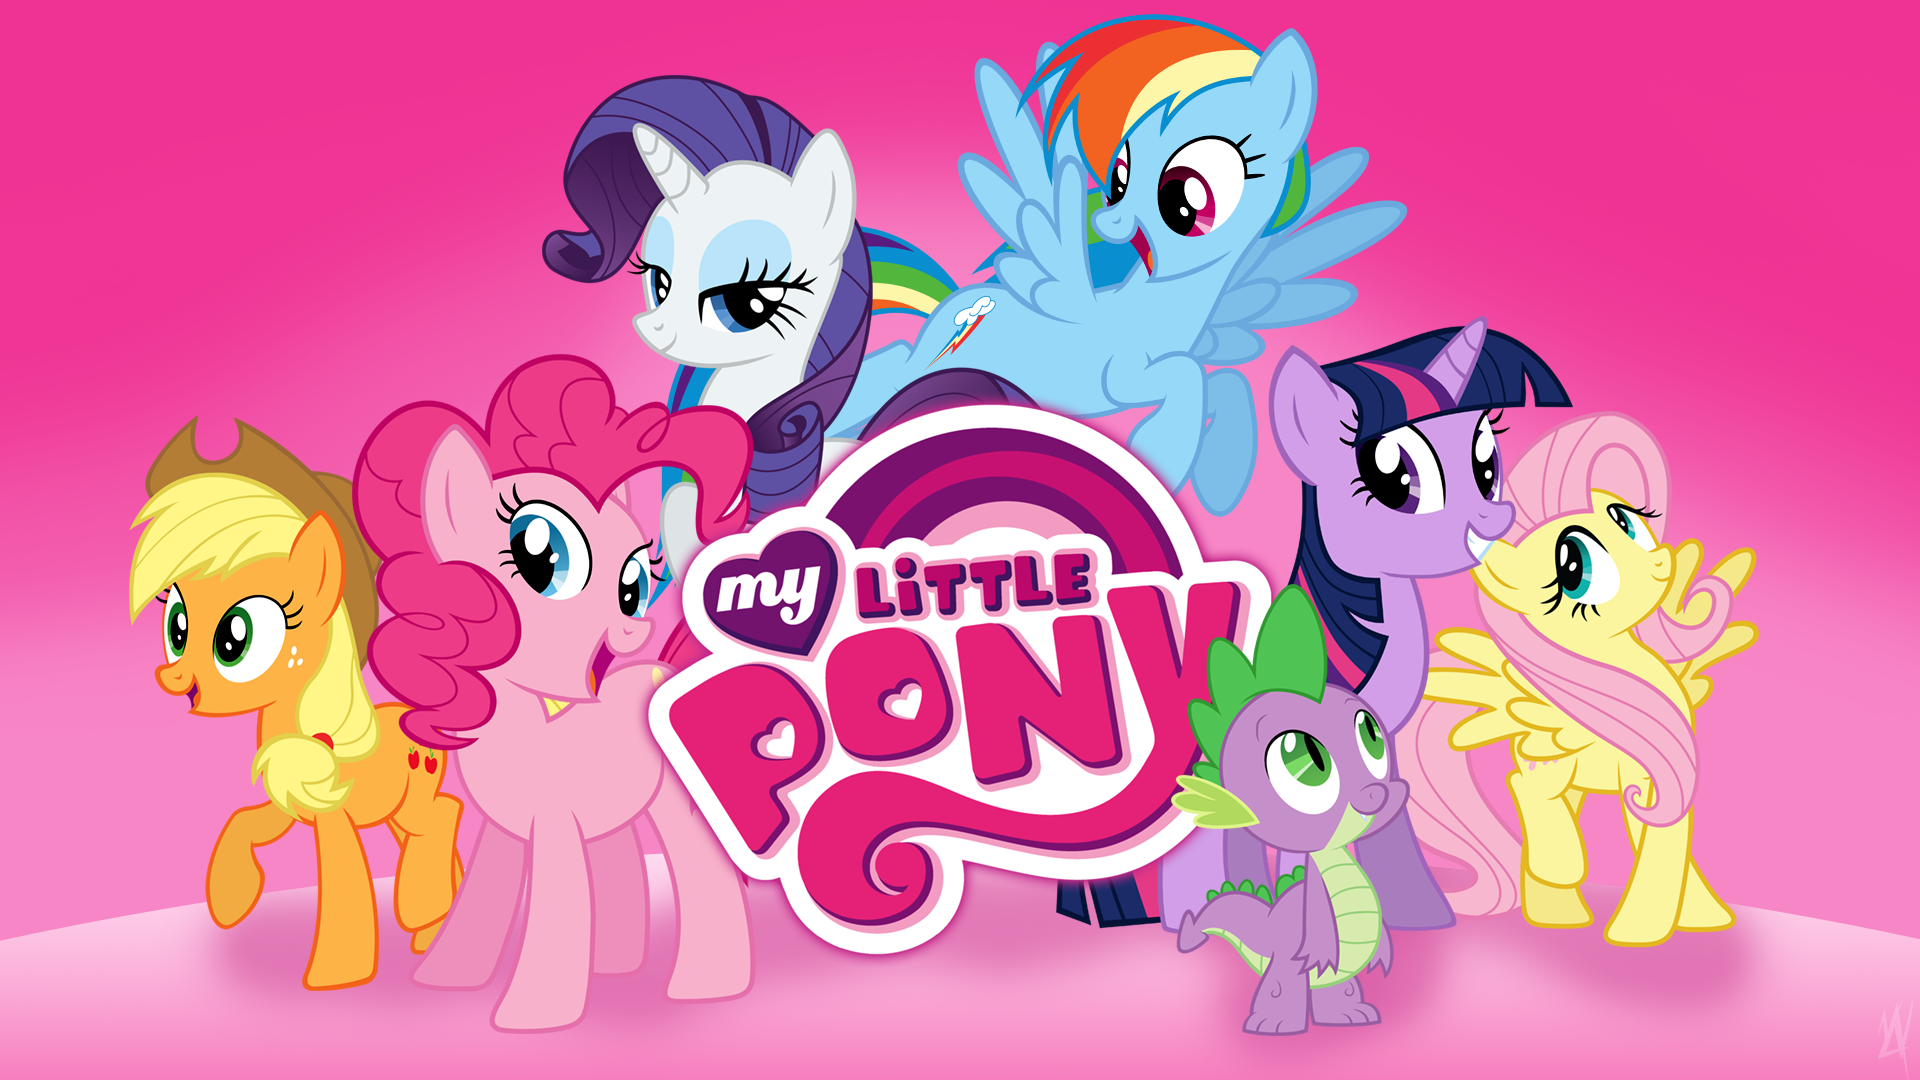 My Little Pony Avatar Items Have Made Their Way Onto Xbox Live